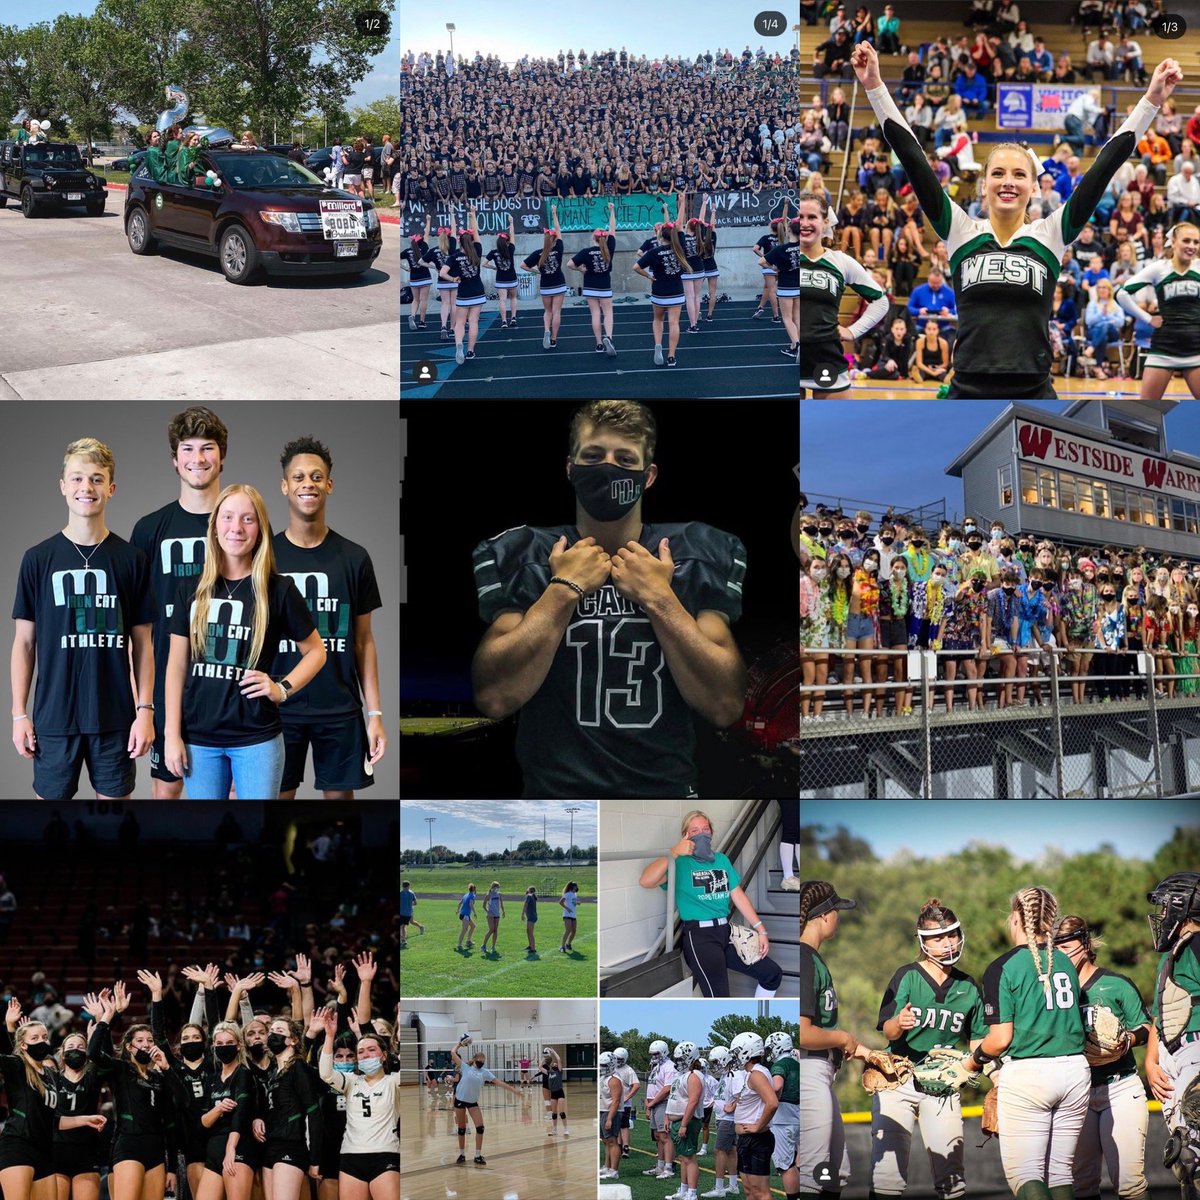 Instagram top 9 for the year... 1. Drive by graduation 🎓 2. Missing student sections ☹️ 3. Cheer comp 📣 4. Iron Cats 🐾 5. Conway 💪🏼 6. Welcome back 👏🏼 7. Great volleyball season 🏐 8. Back with masks 😷 9. Teamwork 🤝